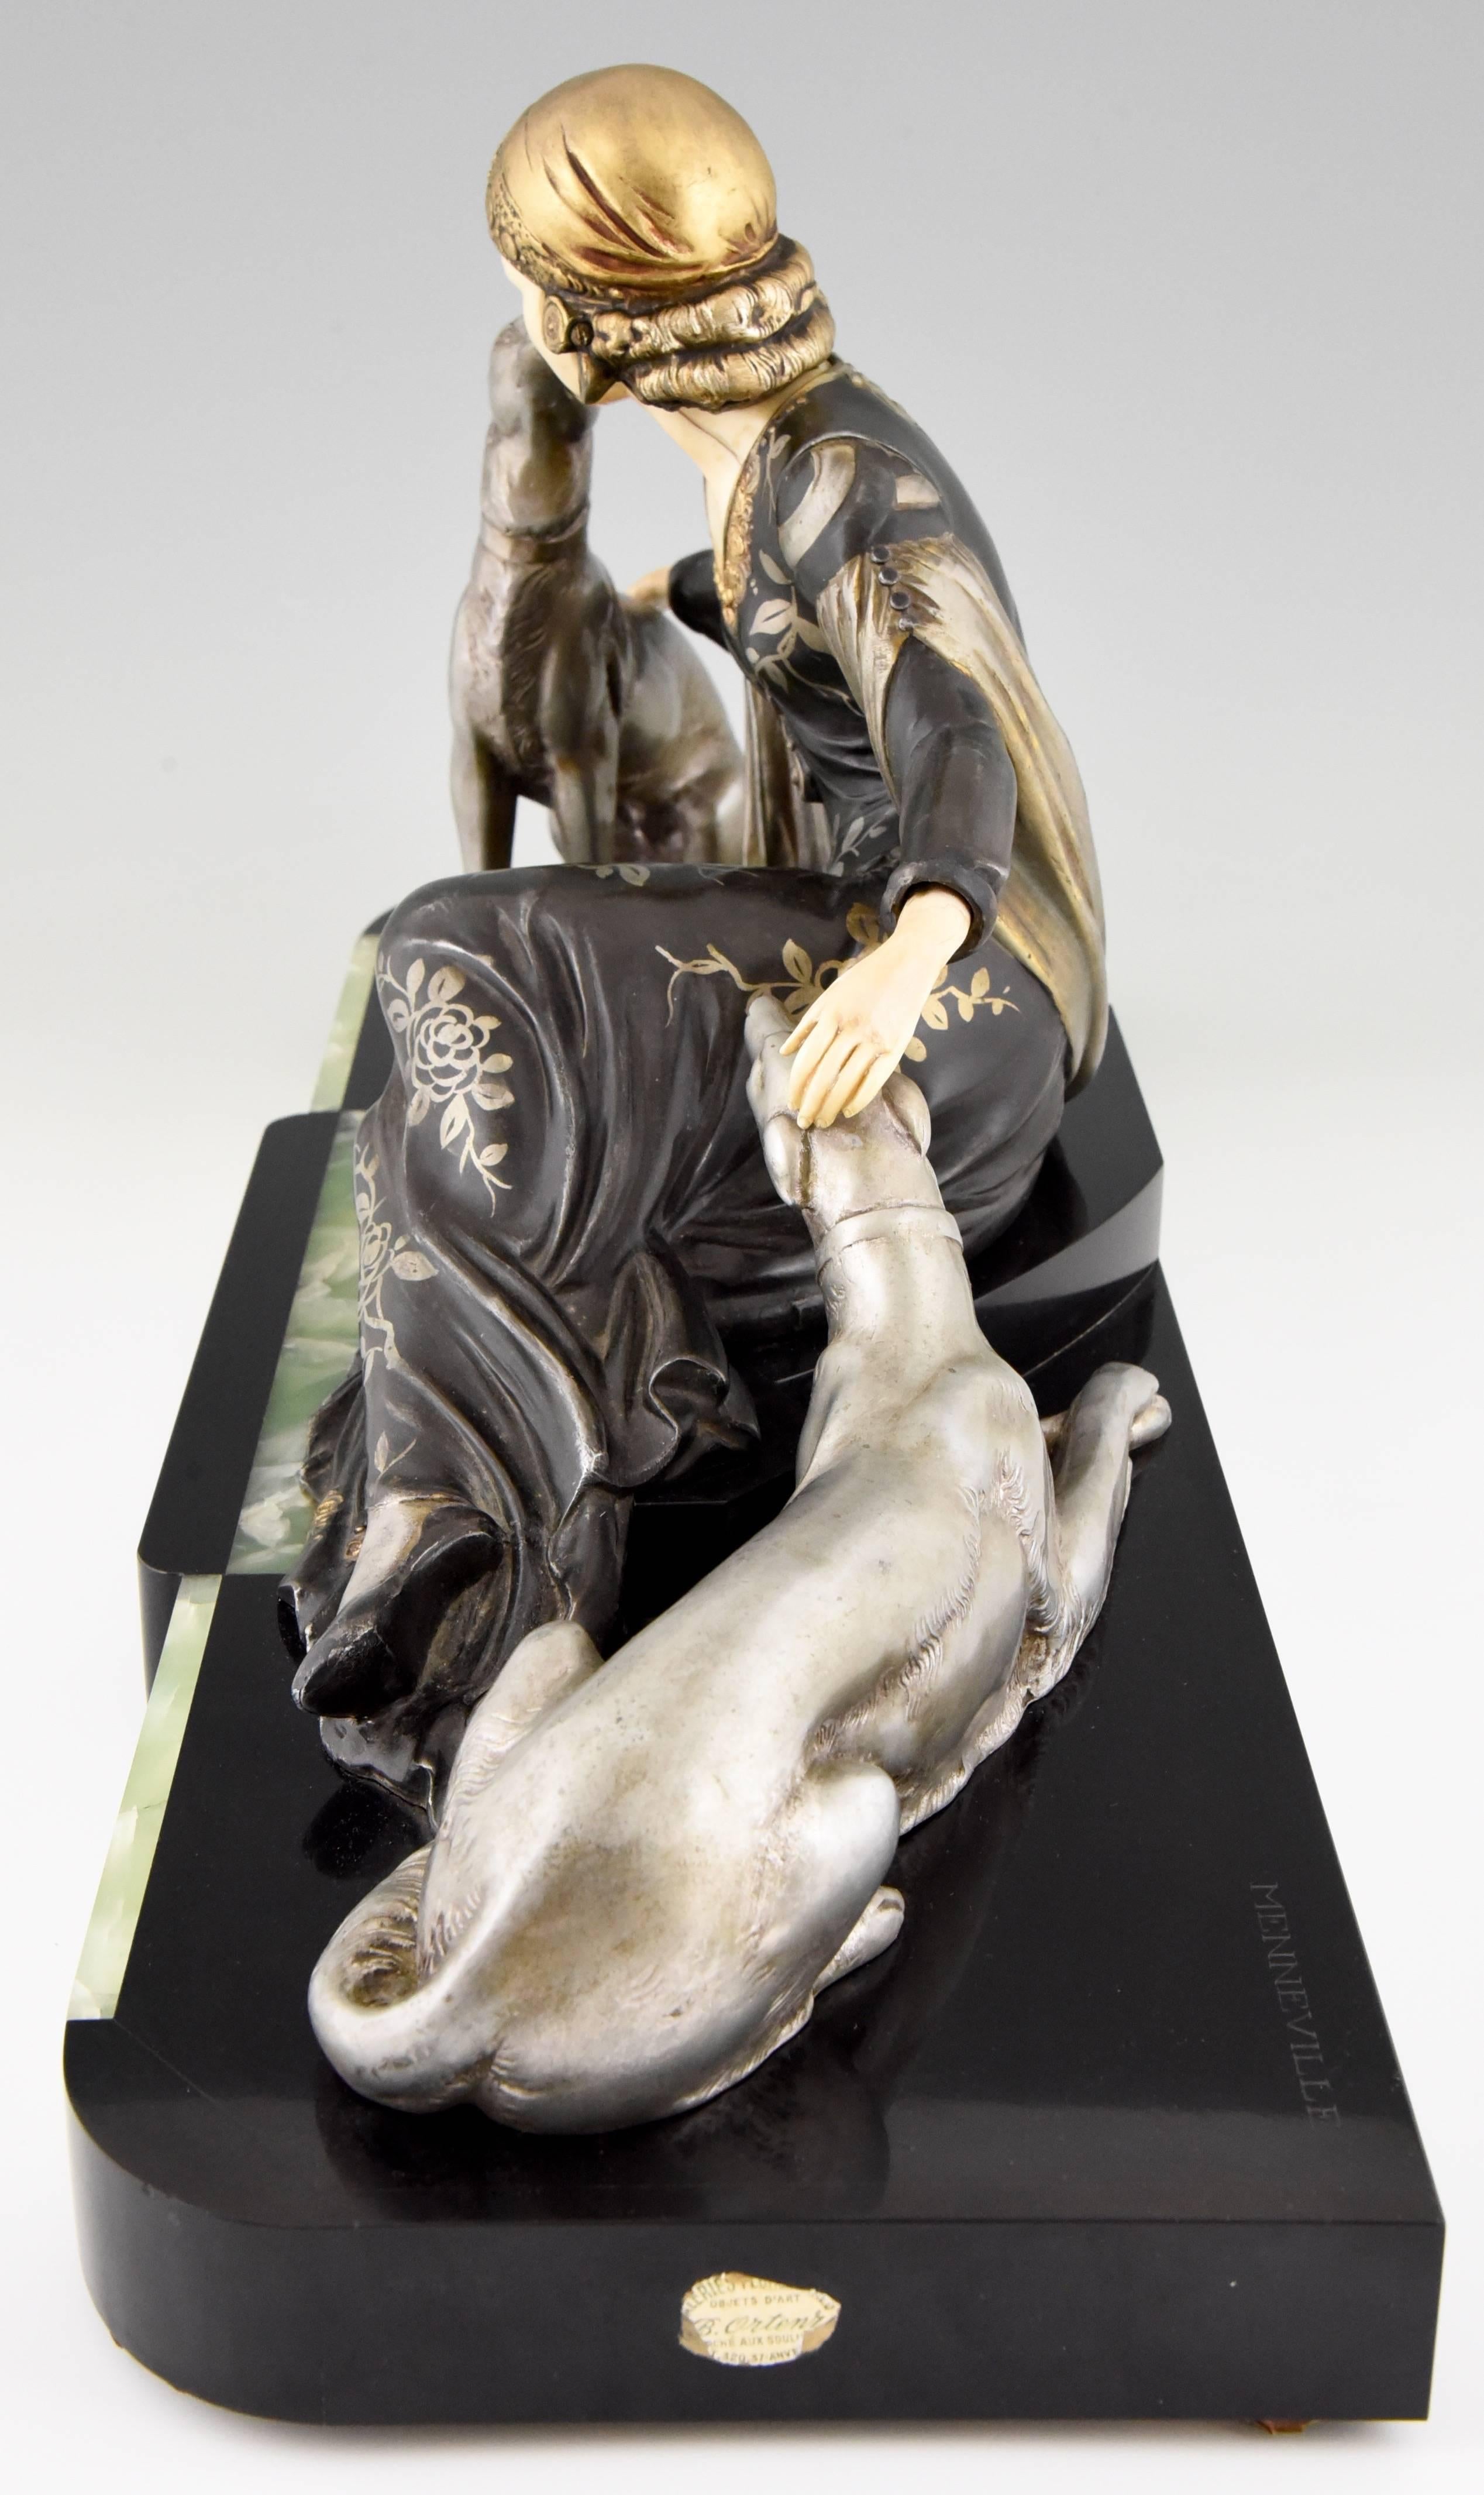 20th Century French Art Deco Sculpture of Lady with Dogs by Menneville, 1930